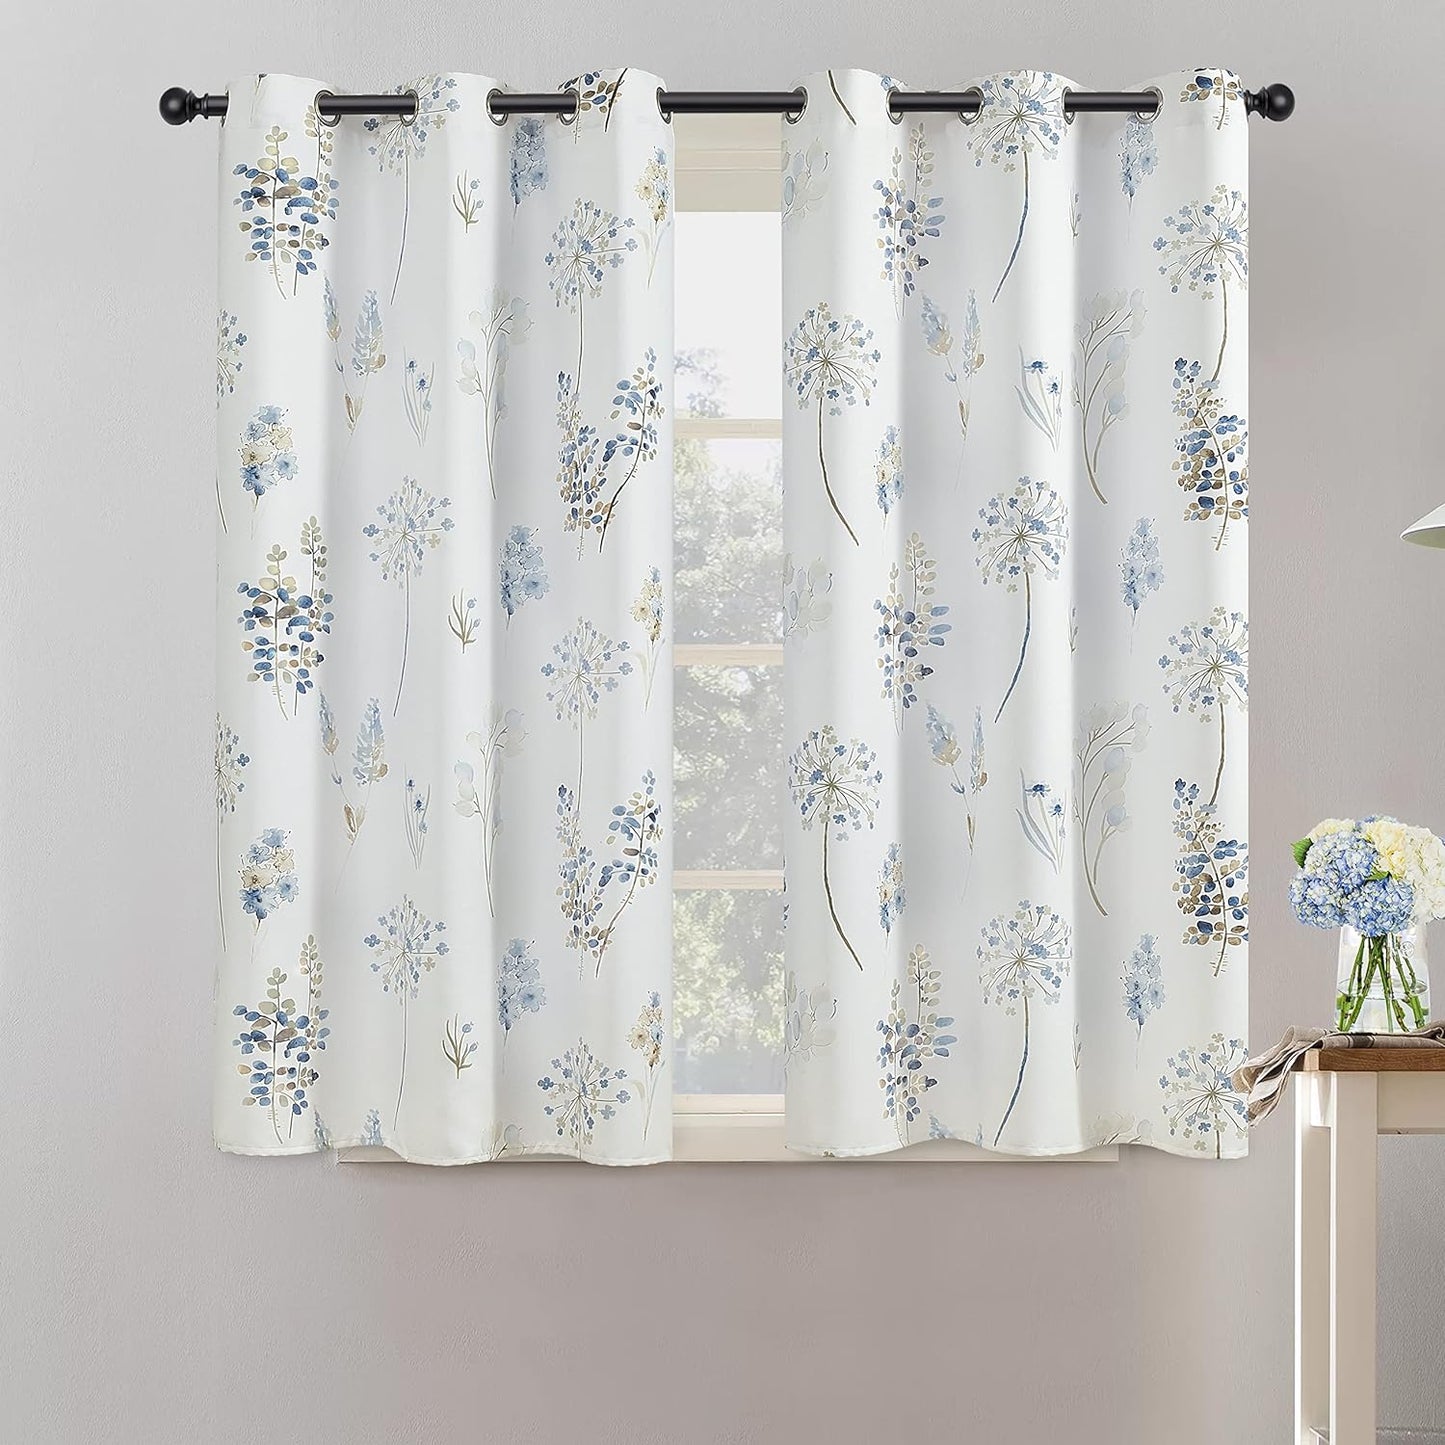 XTMYI 63 Inch Length Sage Green Window Curtains for Bedroom 2 Panels,Room Darkening Watercolor Floral Leaves 80% Blackout Flowered Printed Curtains for Living Room with Grommet,1 Pair Set  XTMYI Blue  Brown 34"X45" 